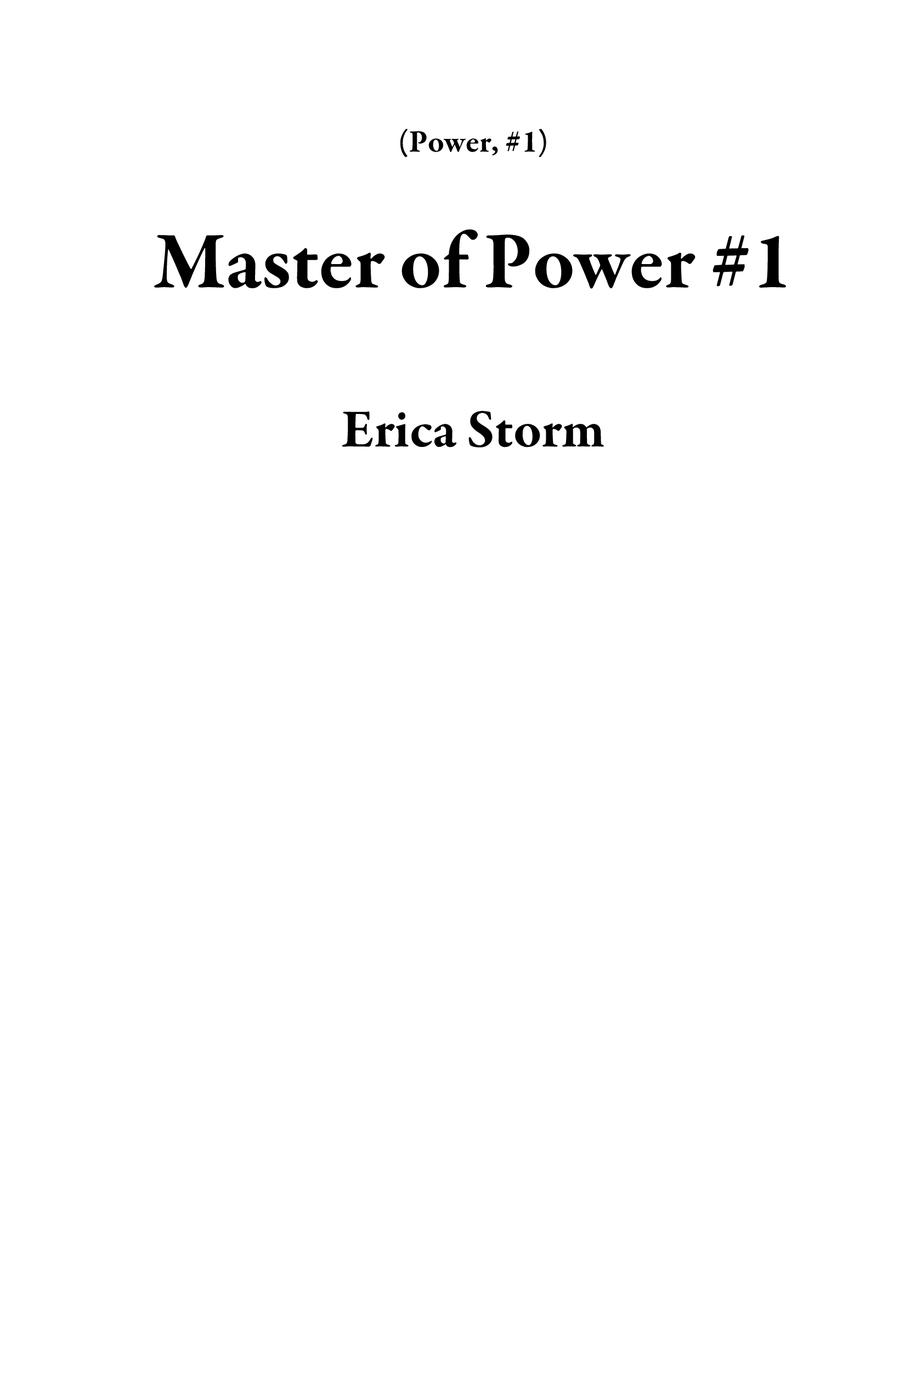 Master of Power #1 (2016) by Erica Storm